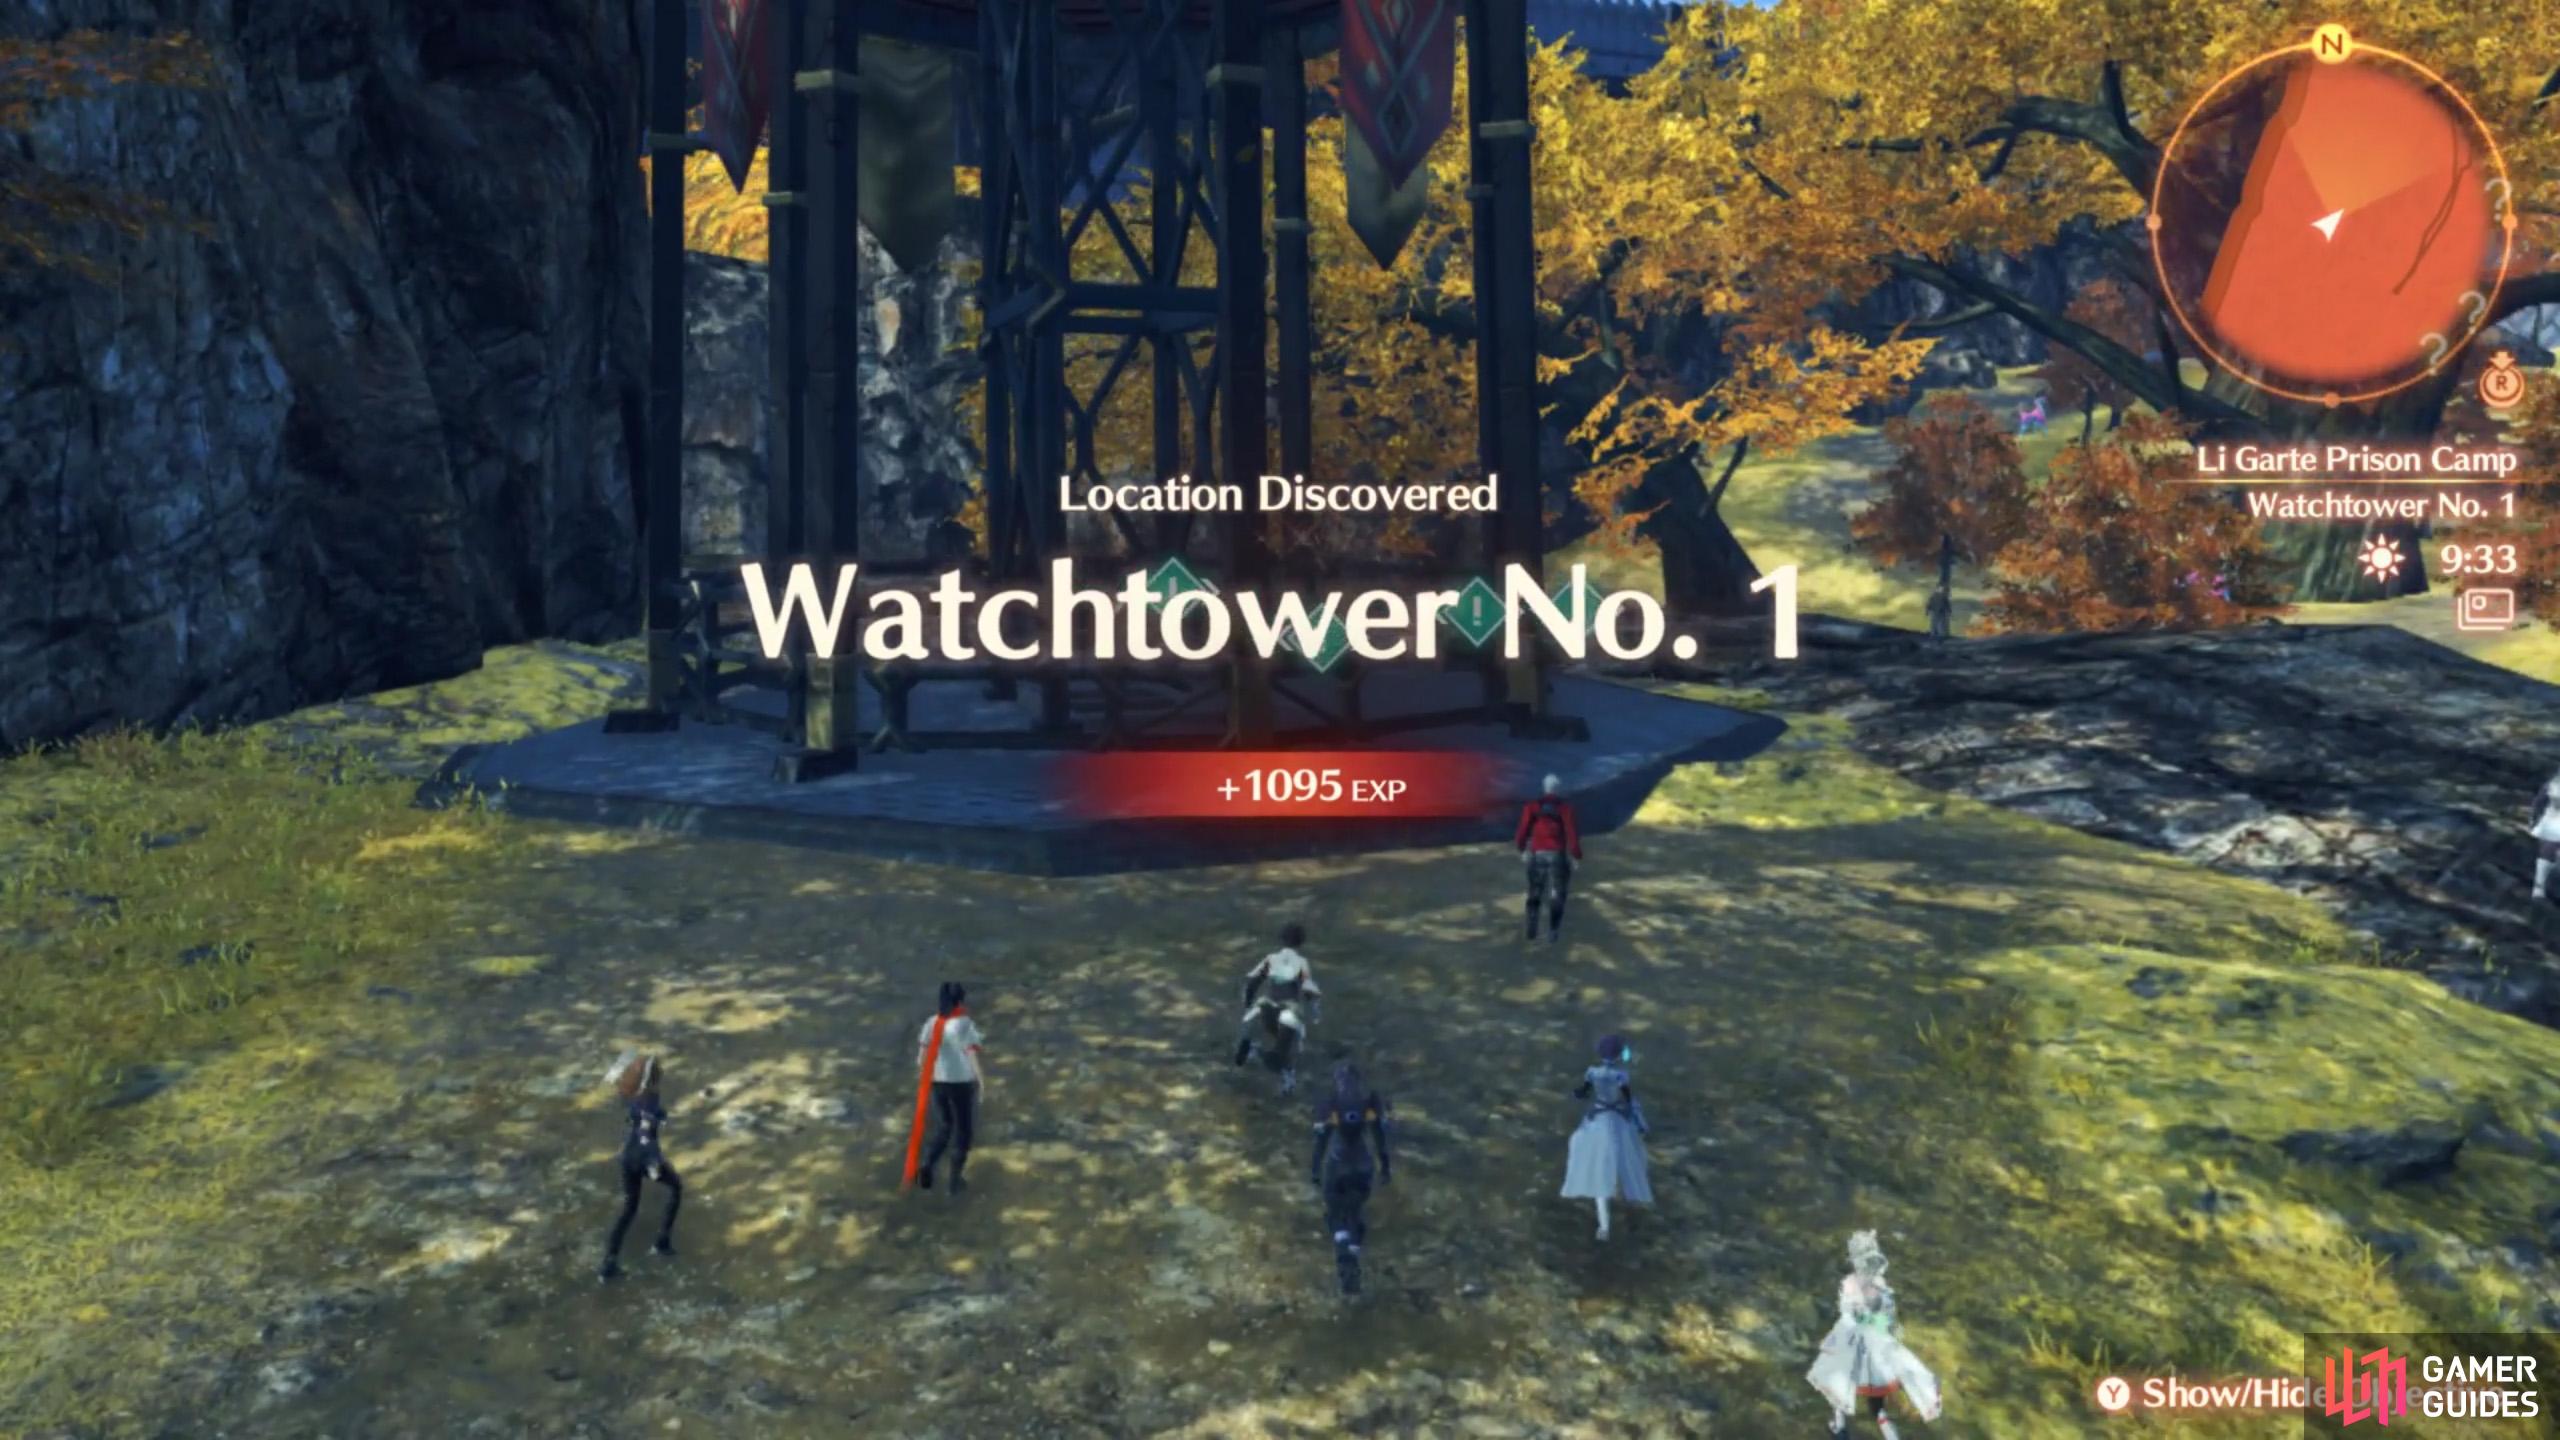 Don't forget to check out this watchtower!